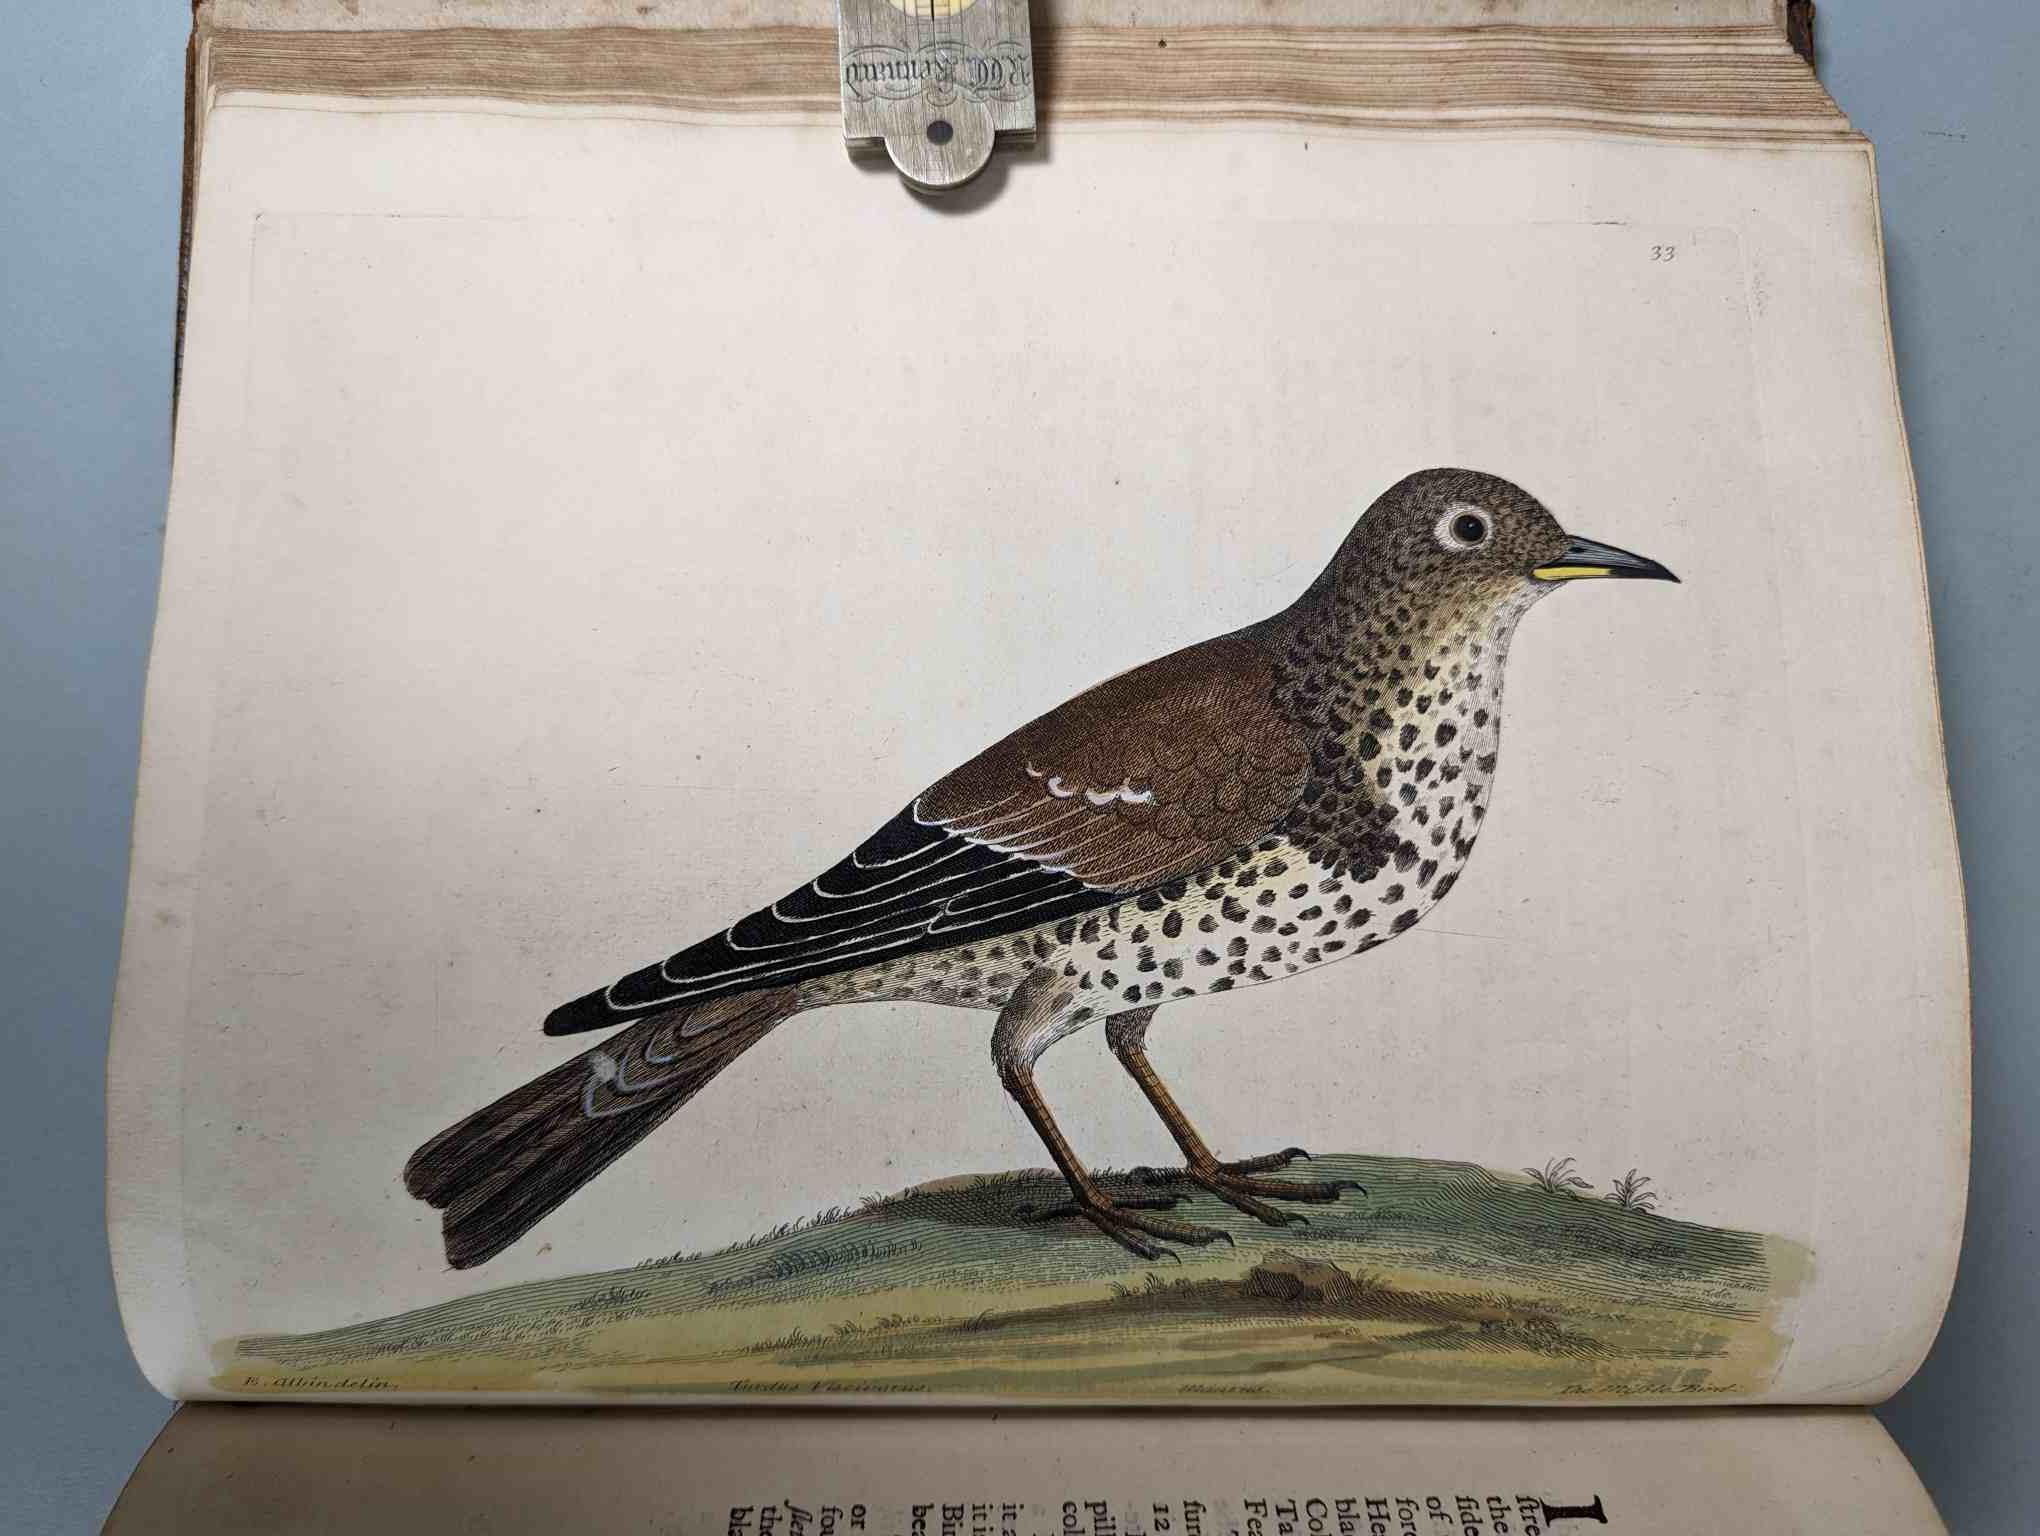 ALBIN, Eleazar. A Natural History of Birds, to which are added, Notes and Observations by W. - Image 36 of 208